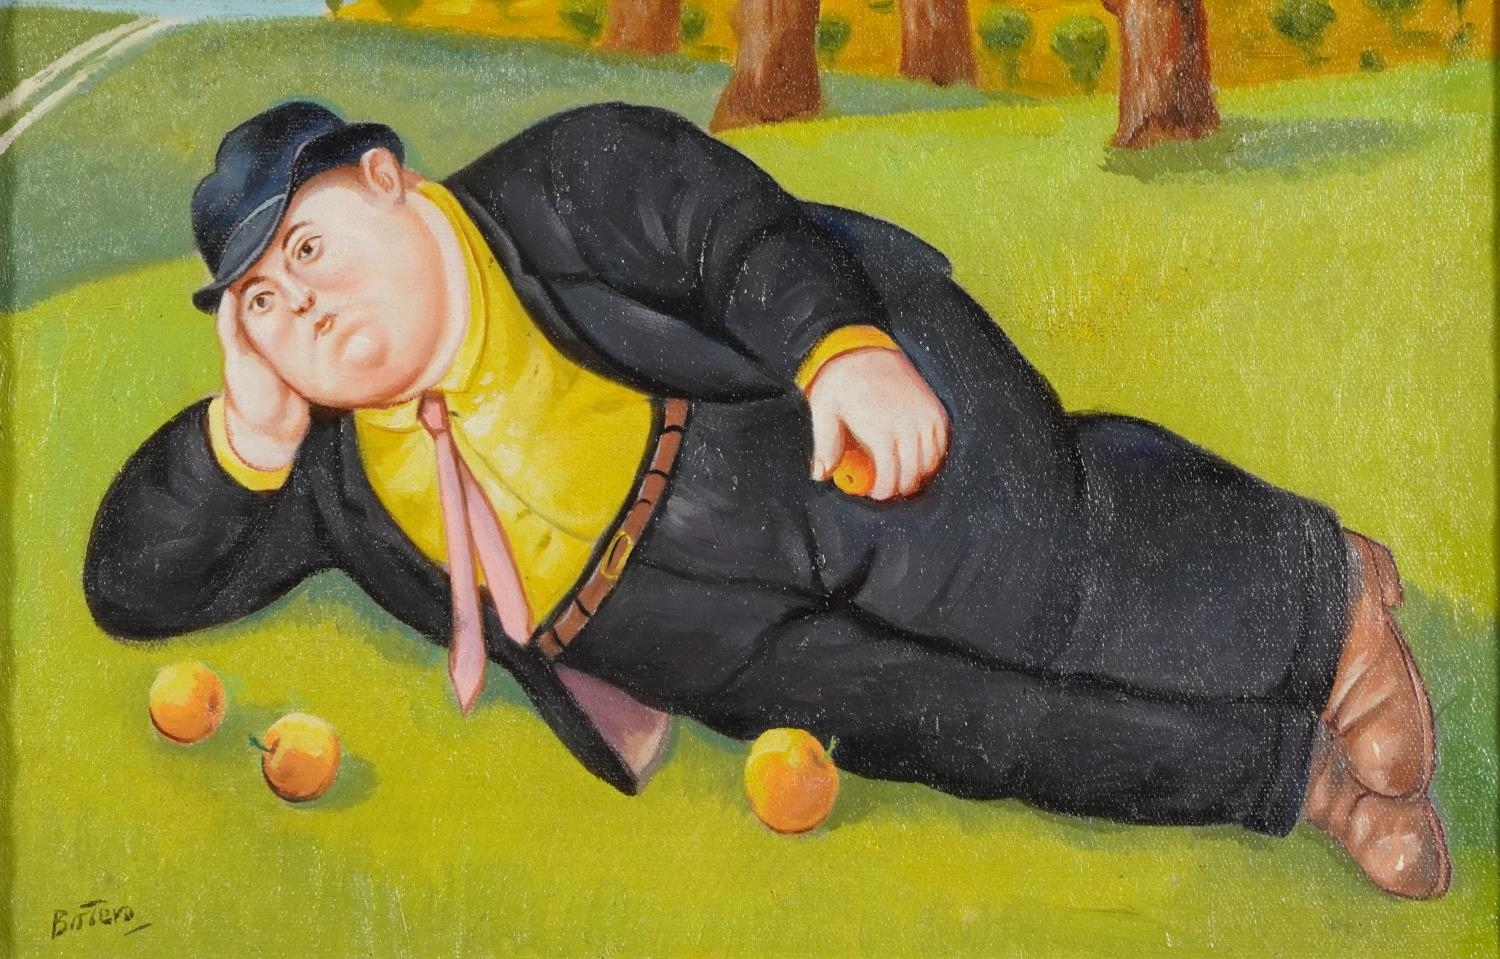 Man in a field with four oranges by Fernando Botero